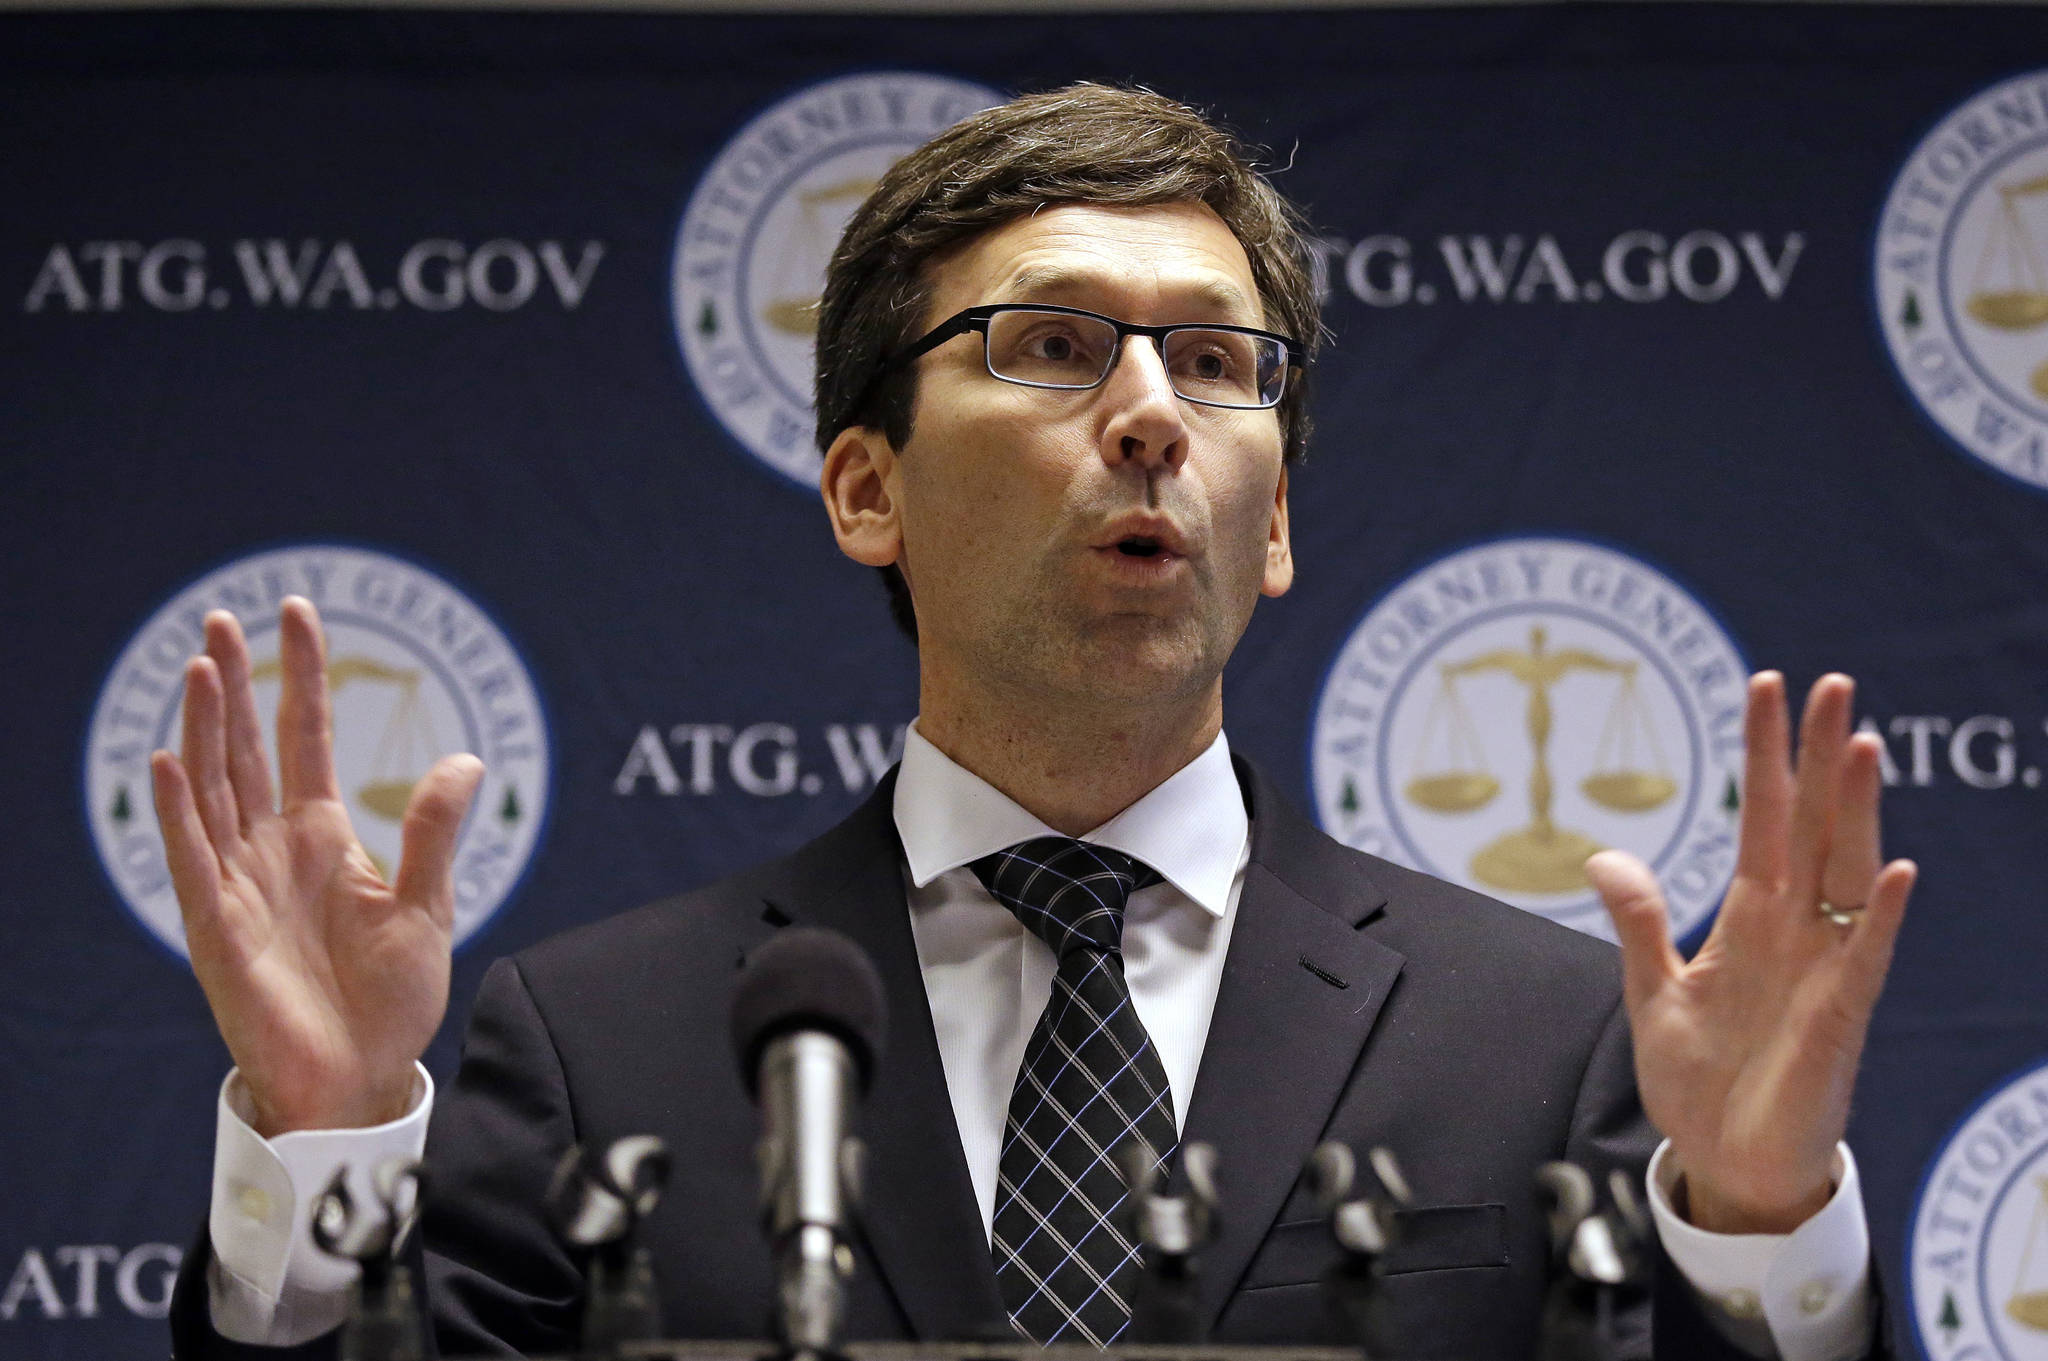 Washington state Attorney General Bob Ferguson speaks on Nov. 28 at a news conference in Seattle. (Elaine Thompson/The Associated Press)